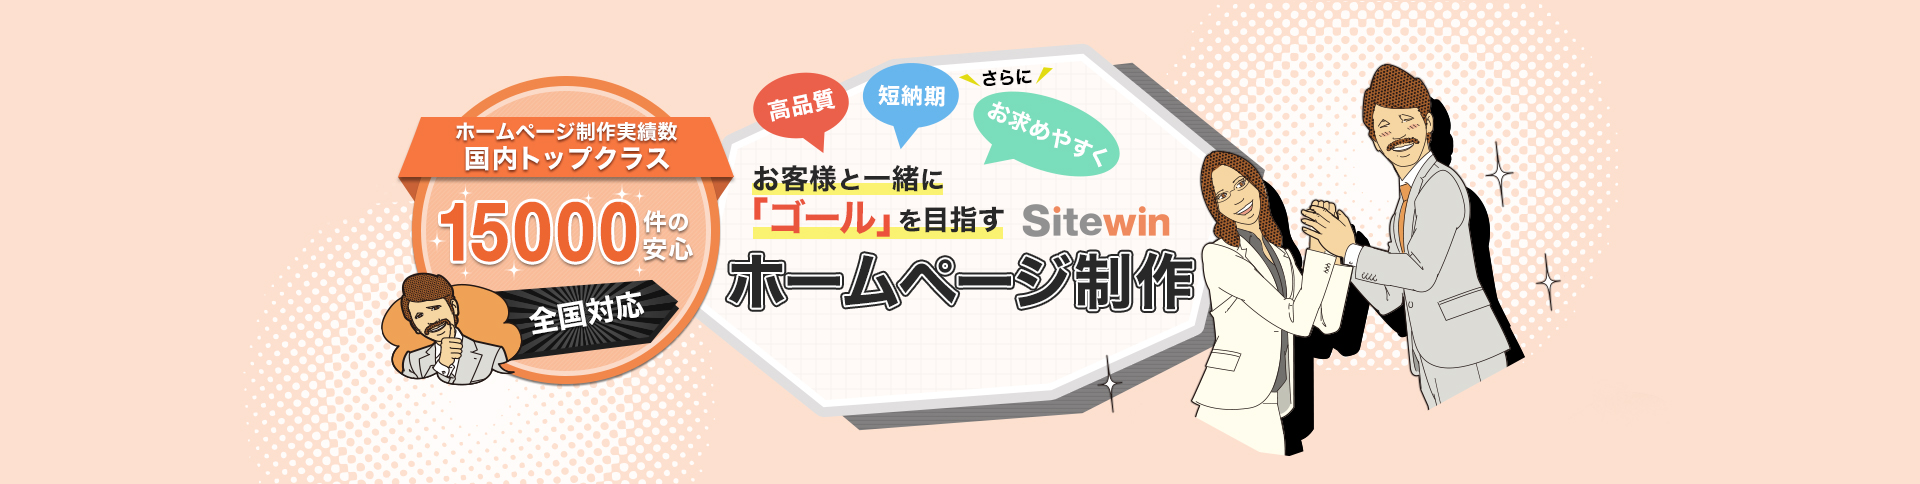 sitewin